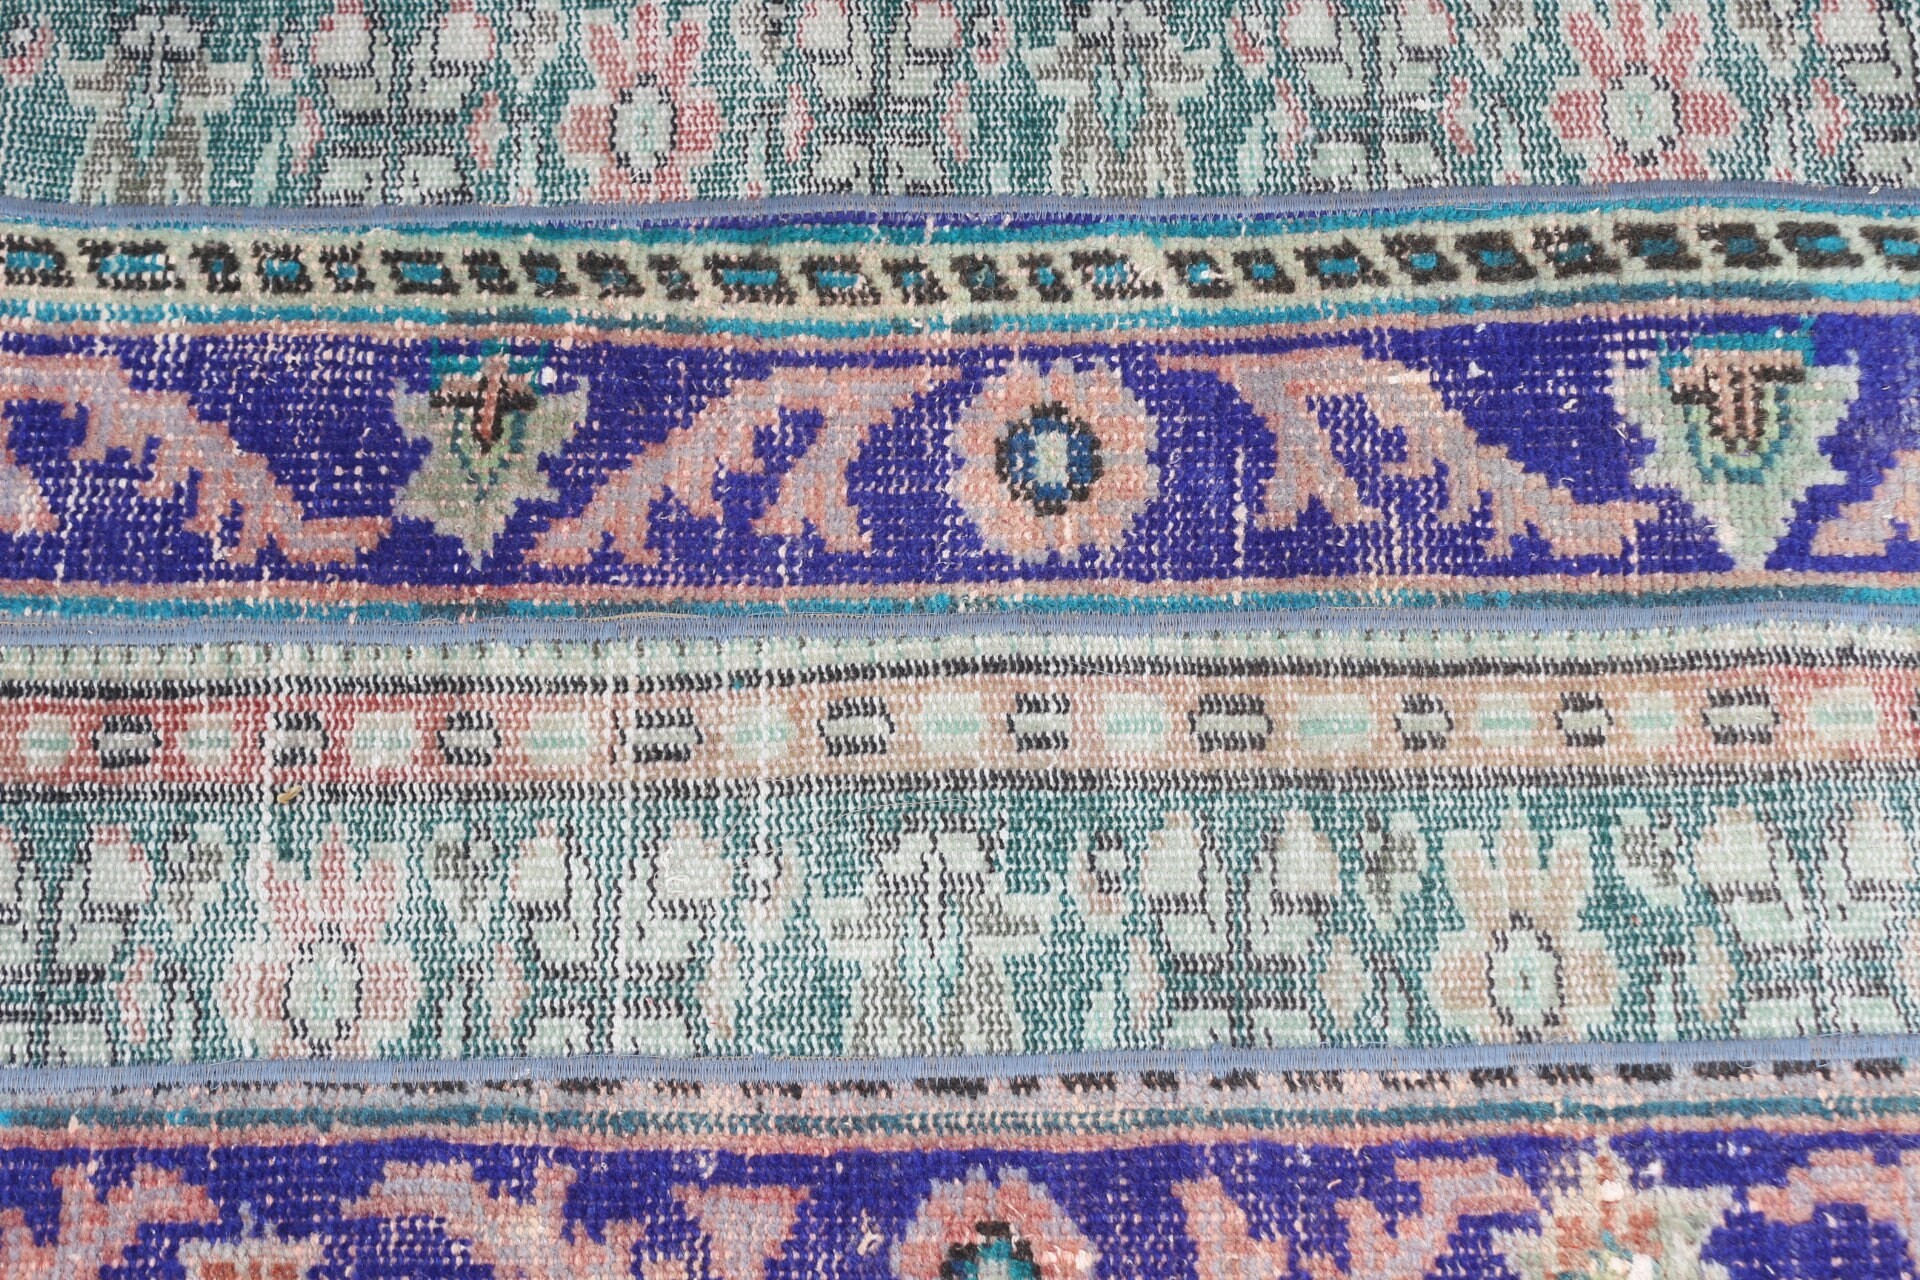 Green Bedroom Rugs, Kitchen Rug, Wool Rug, Vintage Rug, Rugs for Entry, Home Decor Rugs, Turkish Rugs, Outdoor Rug, 2.3x3.9 ft Small Rugs